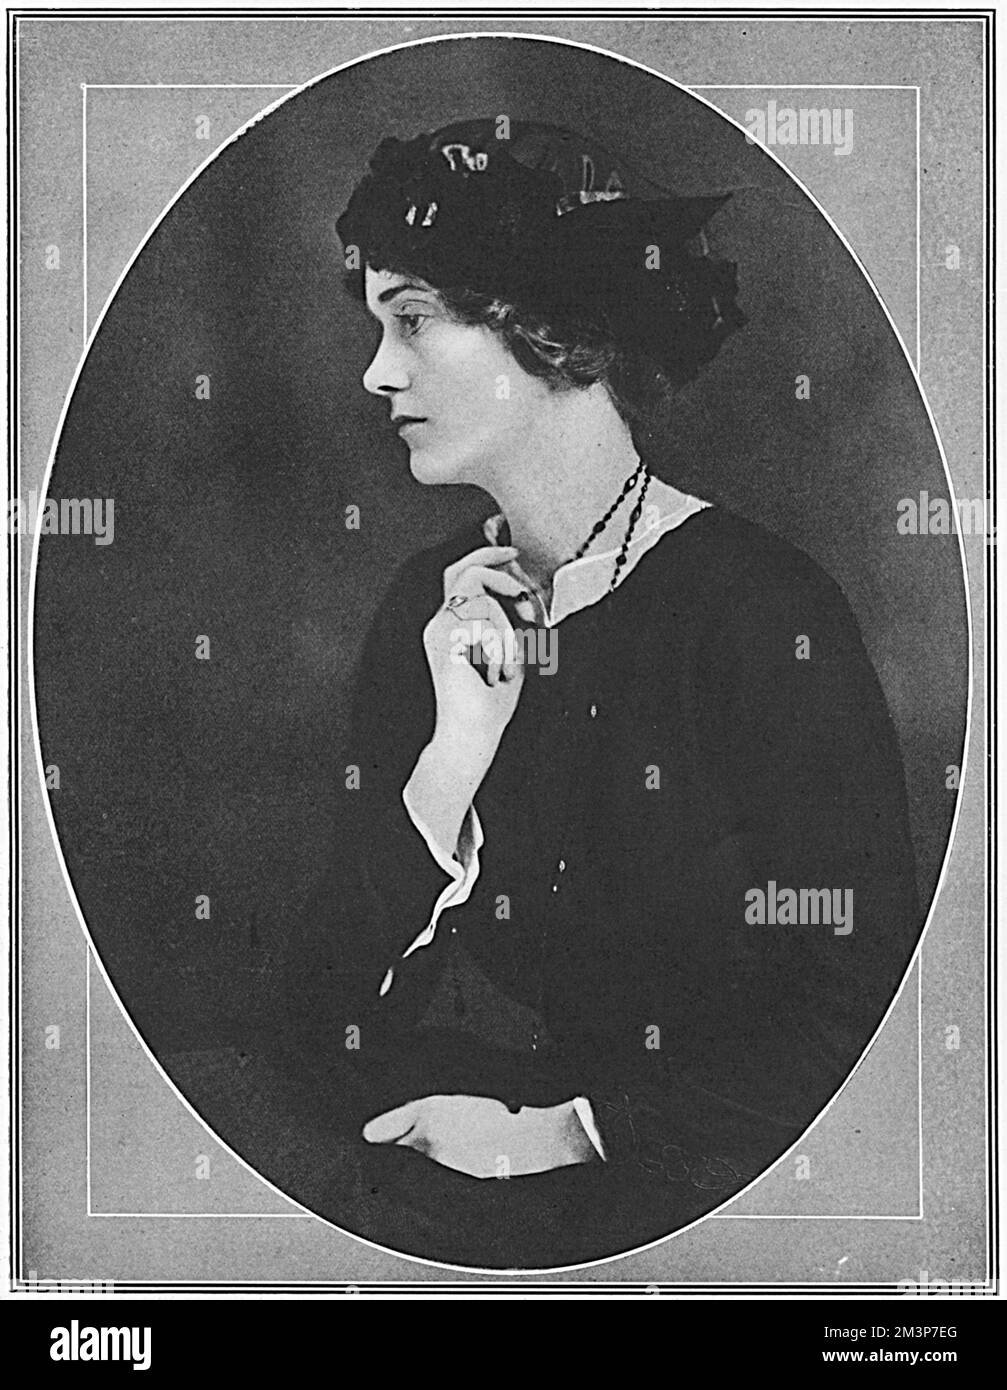 Lady Cynthia Asquith (1887-1960 nee Charteris), daughter of Lord Wemyss, author and notable survivor of the Titanic. Wife of Herbert Asquith, second son of the Prime Minister.  Pictured in The Tatler during the First World War - the magazine comments that she 'has done a great deal of good work for the benefit of both our own and our allies' fighting men.'  Her brother-in-law Raymond Asquith was killed in action later that year and Cynthia had already lost her brother, Lord Elcho.         Date: 1916 Stock Photo